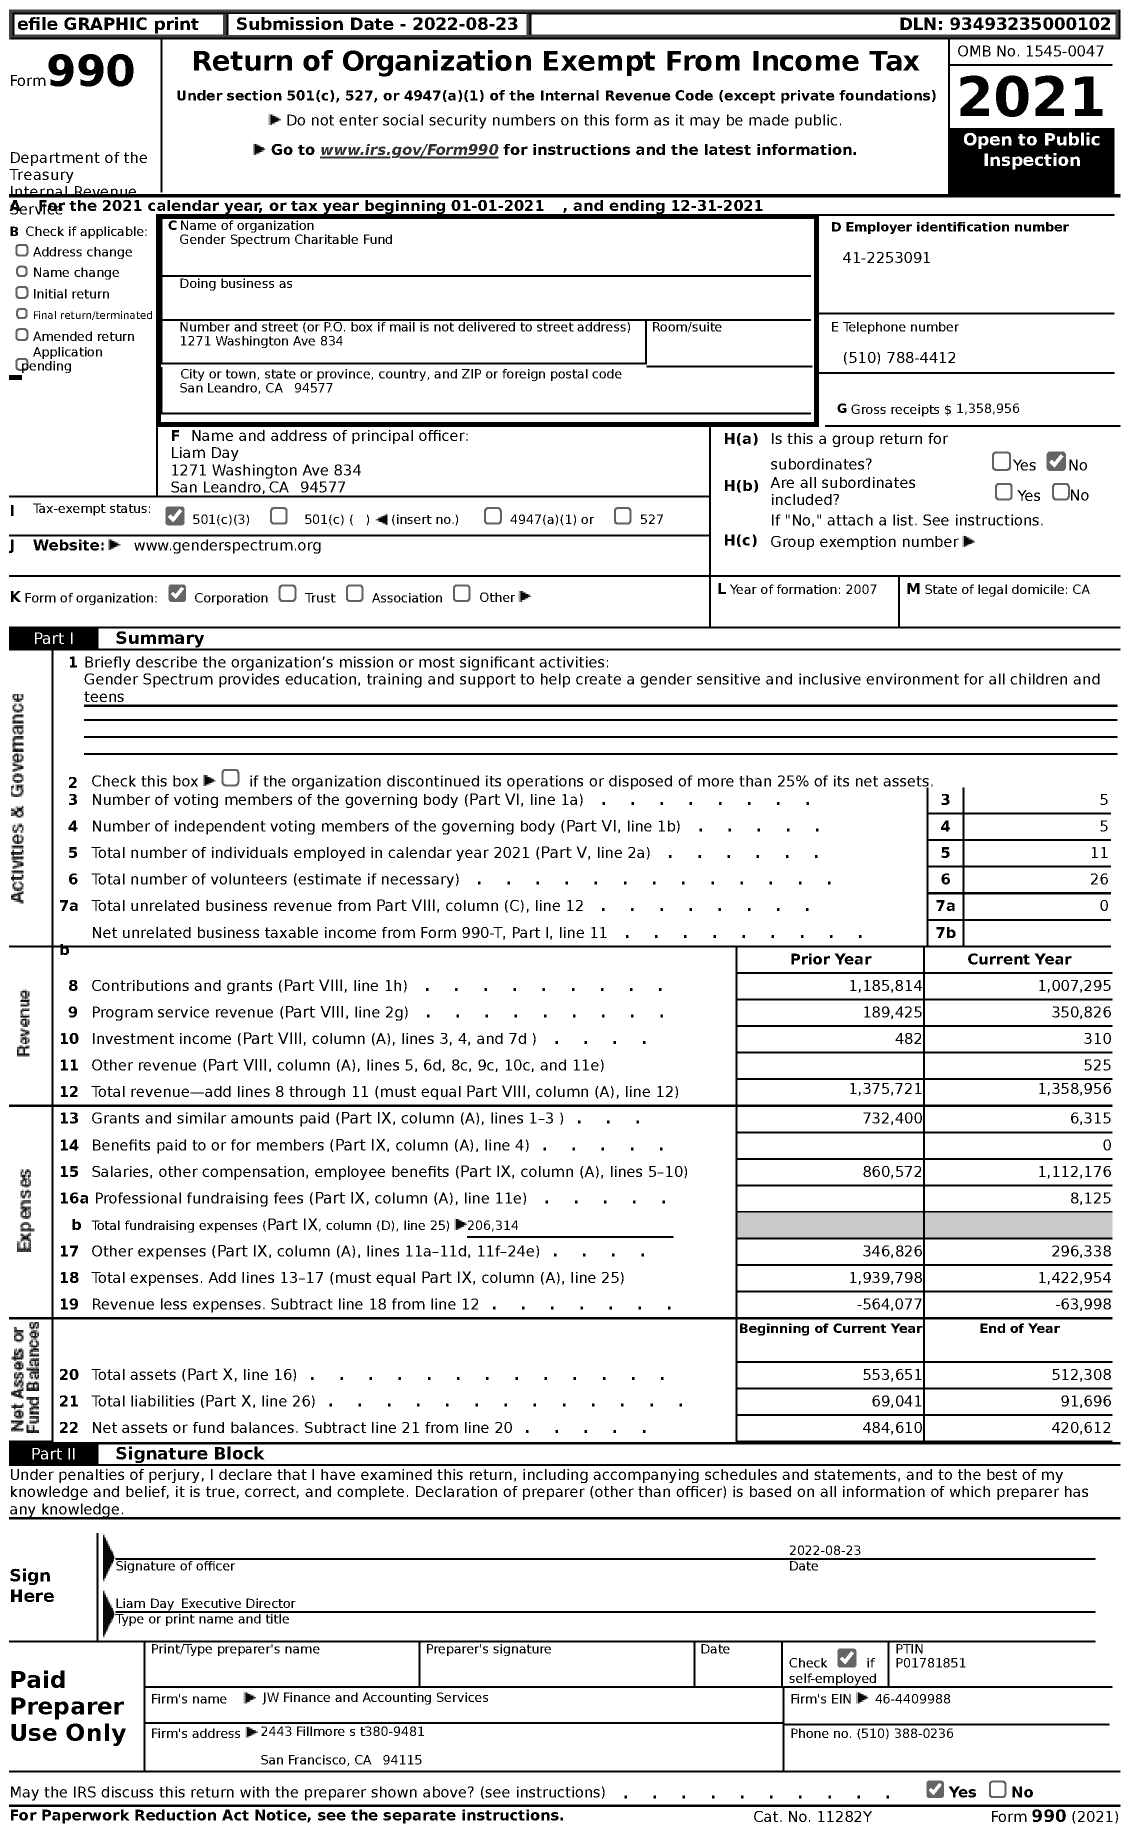 Image of first page of 2021 Form 990 for Gender Spectrum Charitable Fund